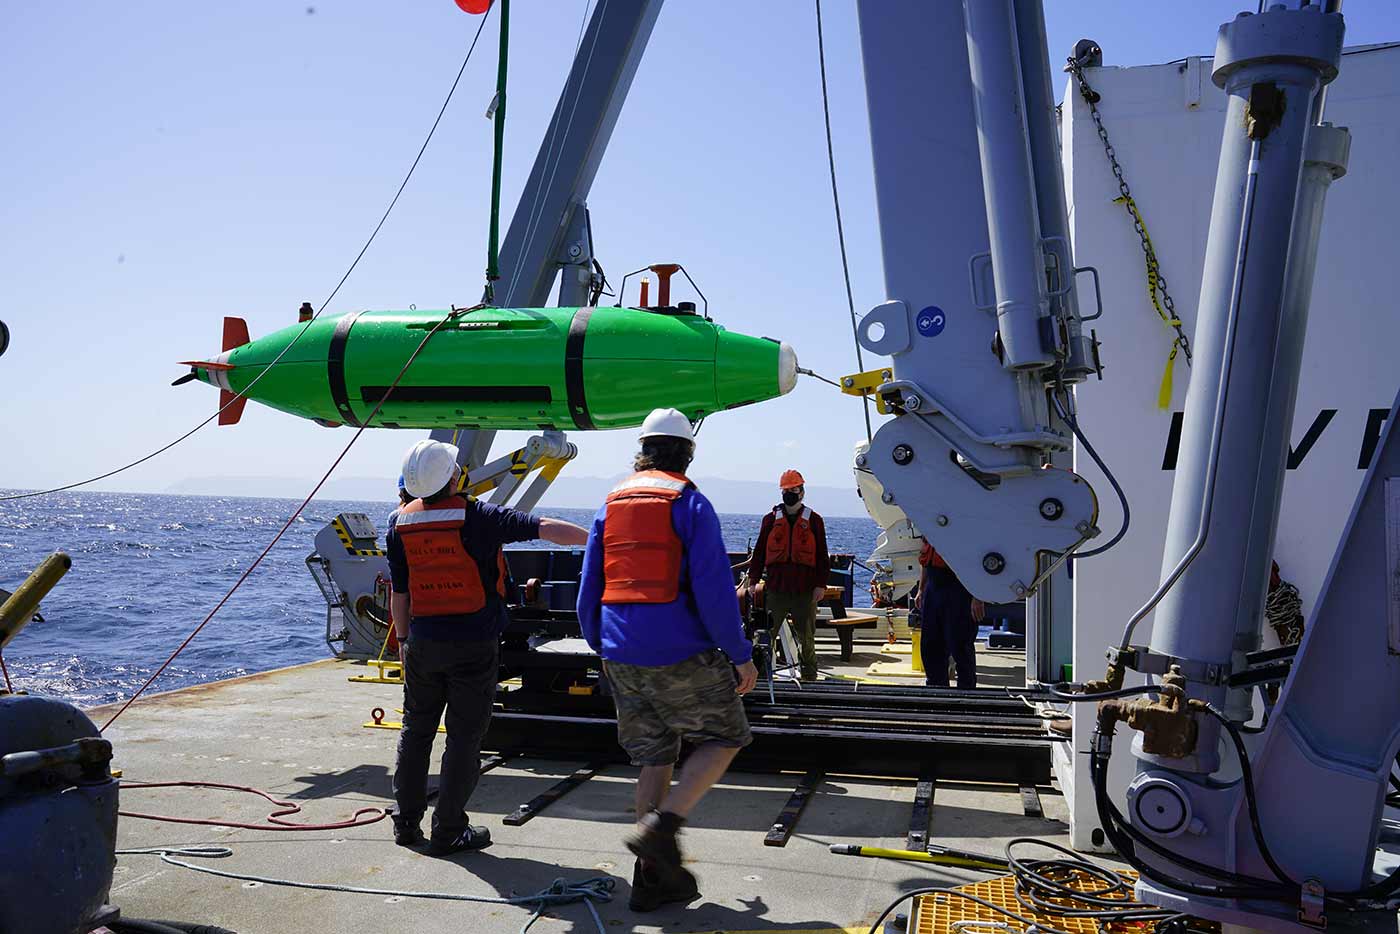 REMUS 6000 autonomous underwater vehicle aboard the Research Vessel Sally Ride.